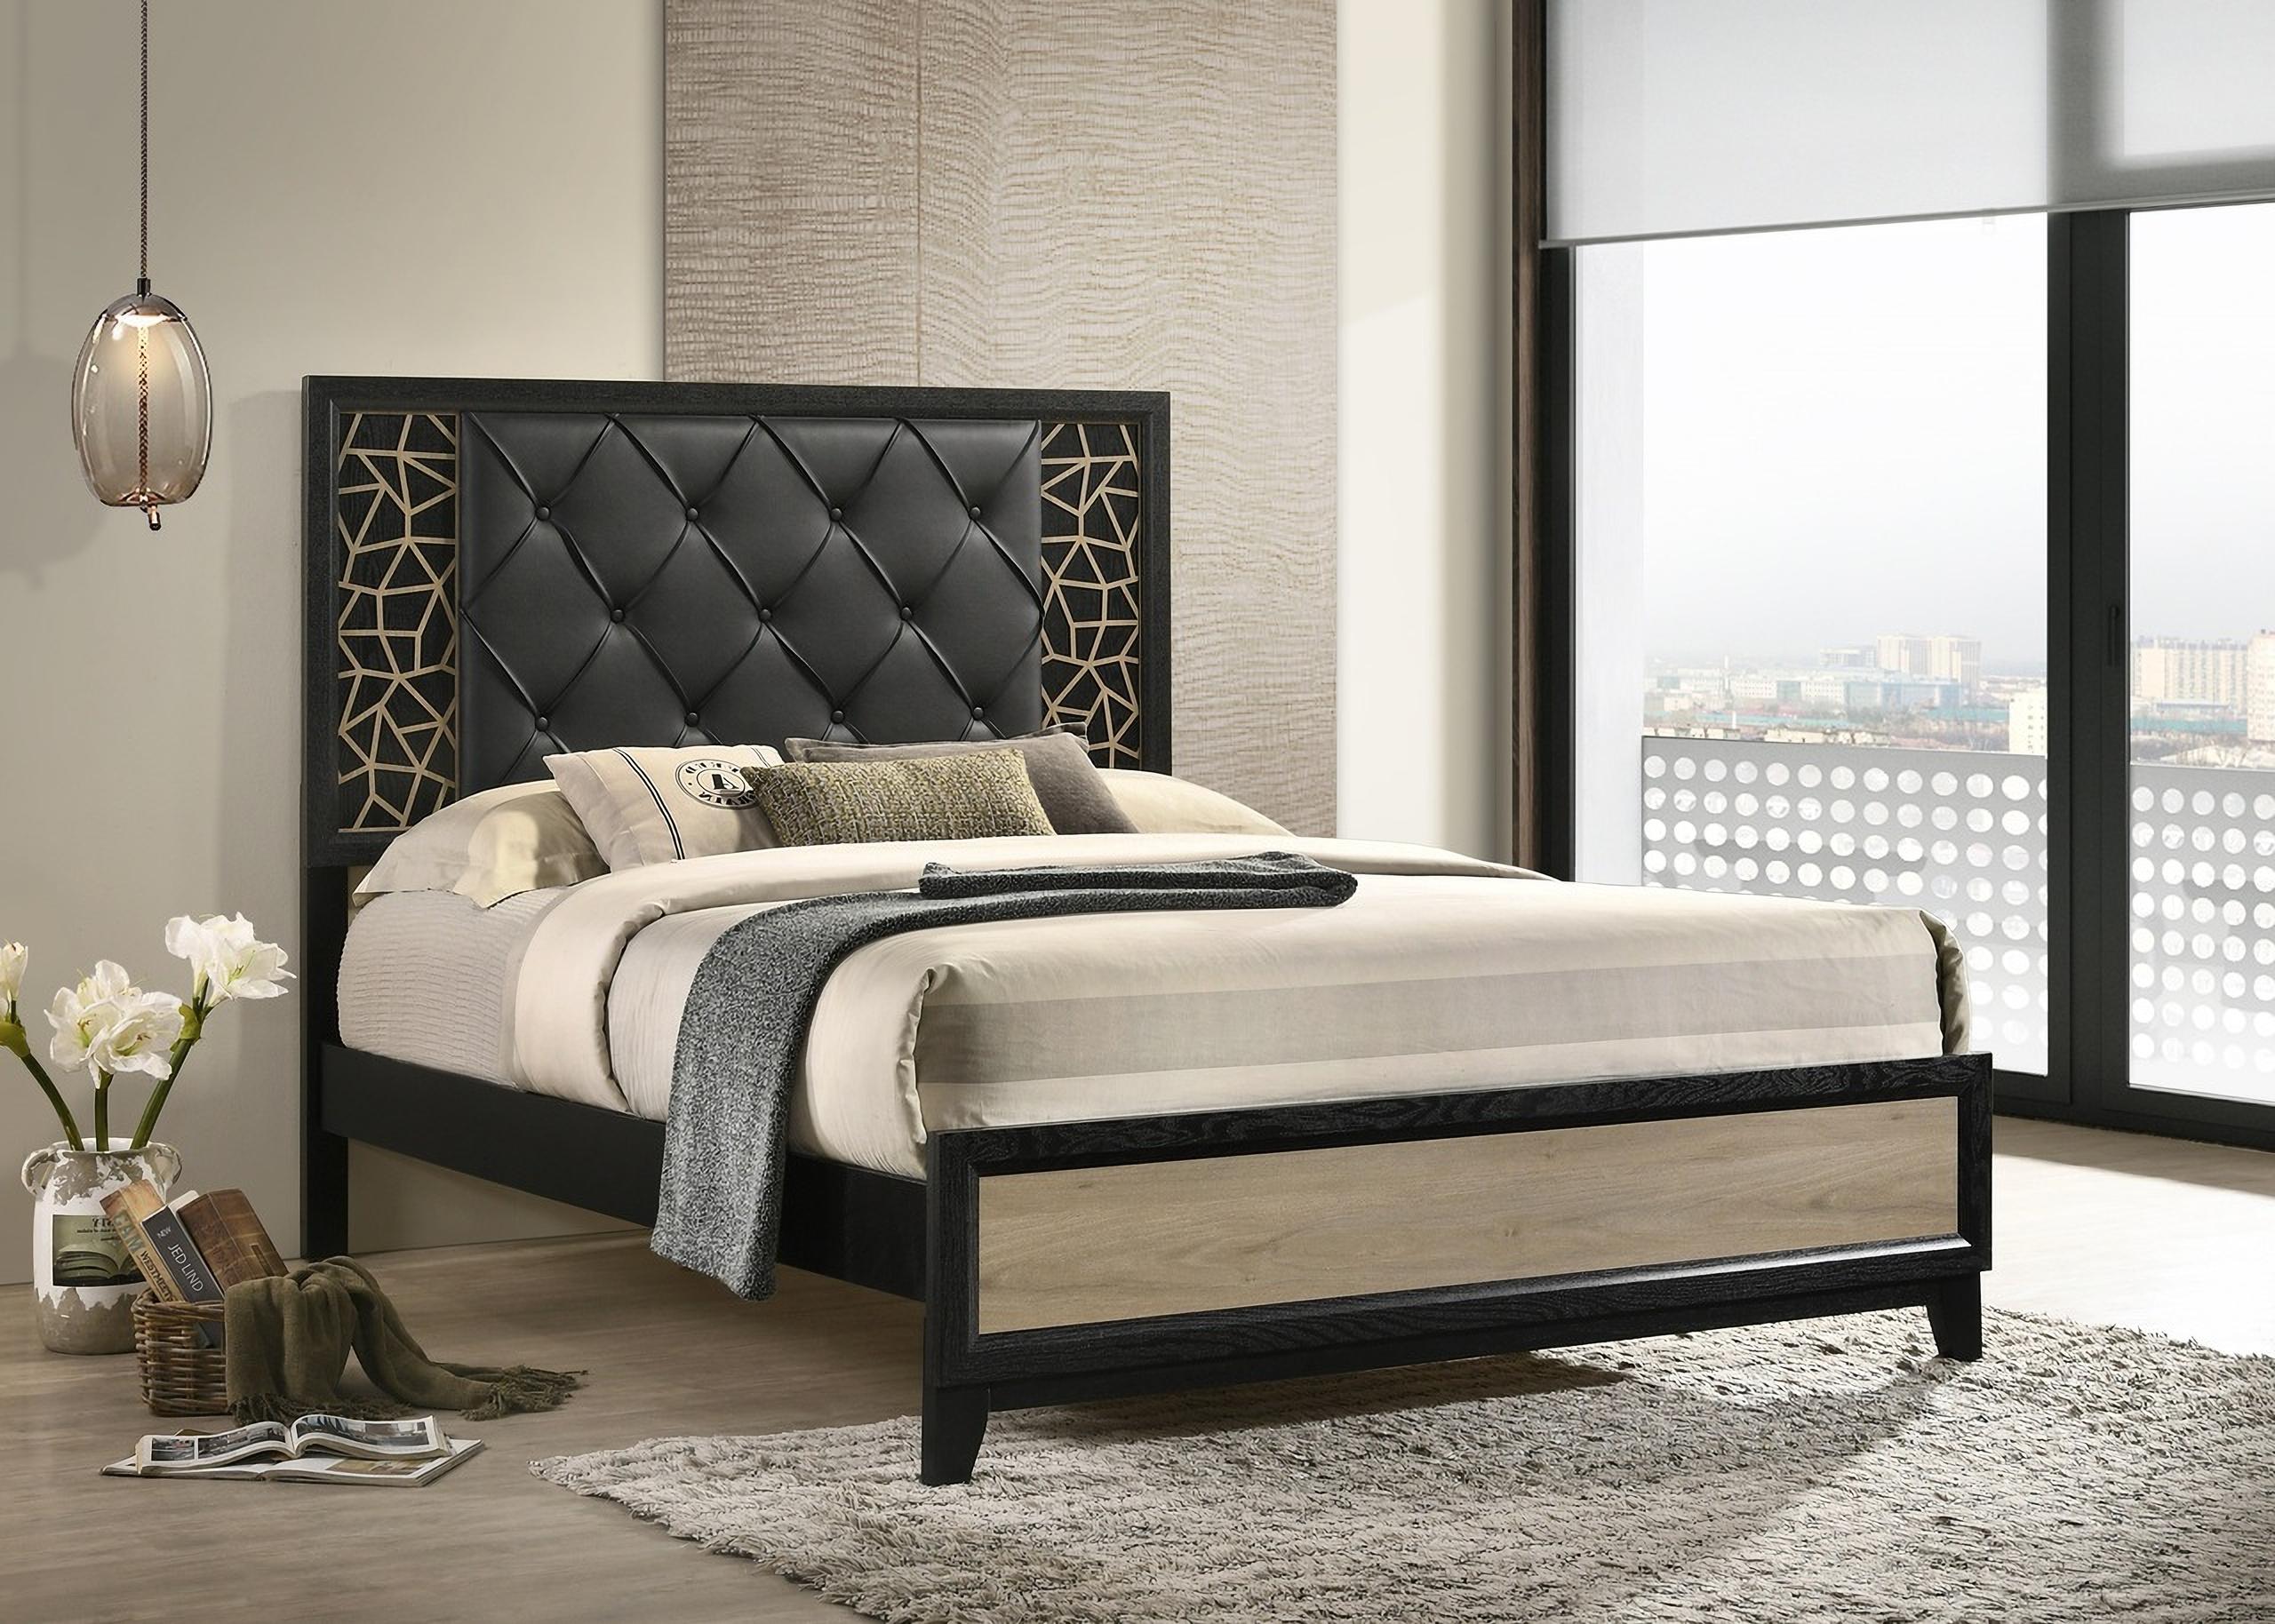 

    
Upholstered Queen Bed Set 5Pcs with Wooden Pattern In Black Selena Galaxy Home Contemporary
